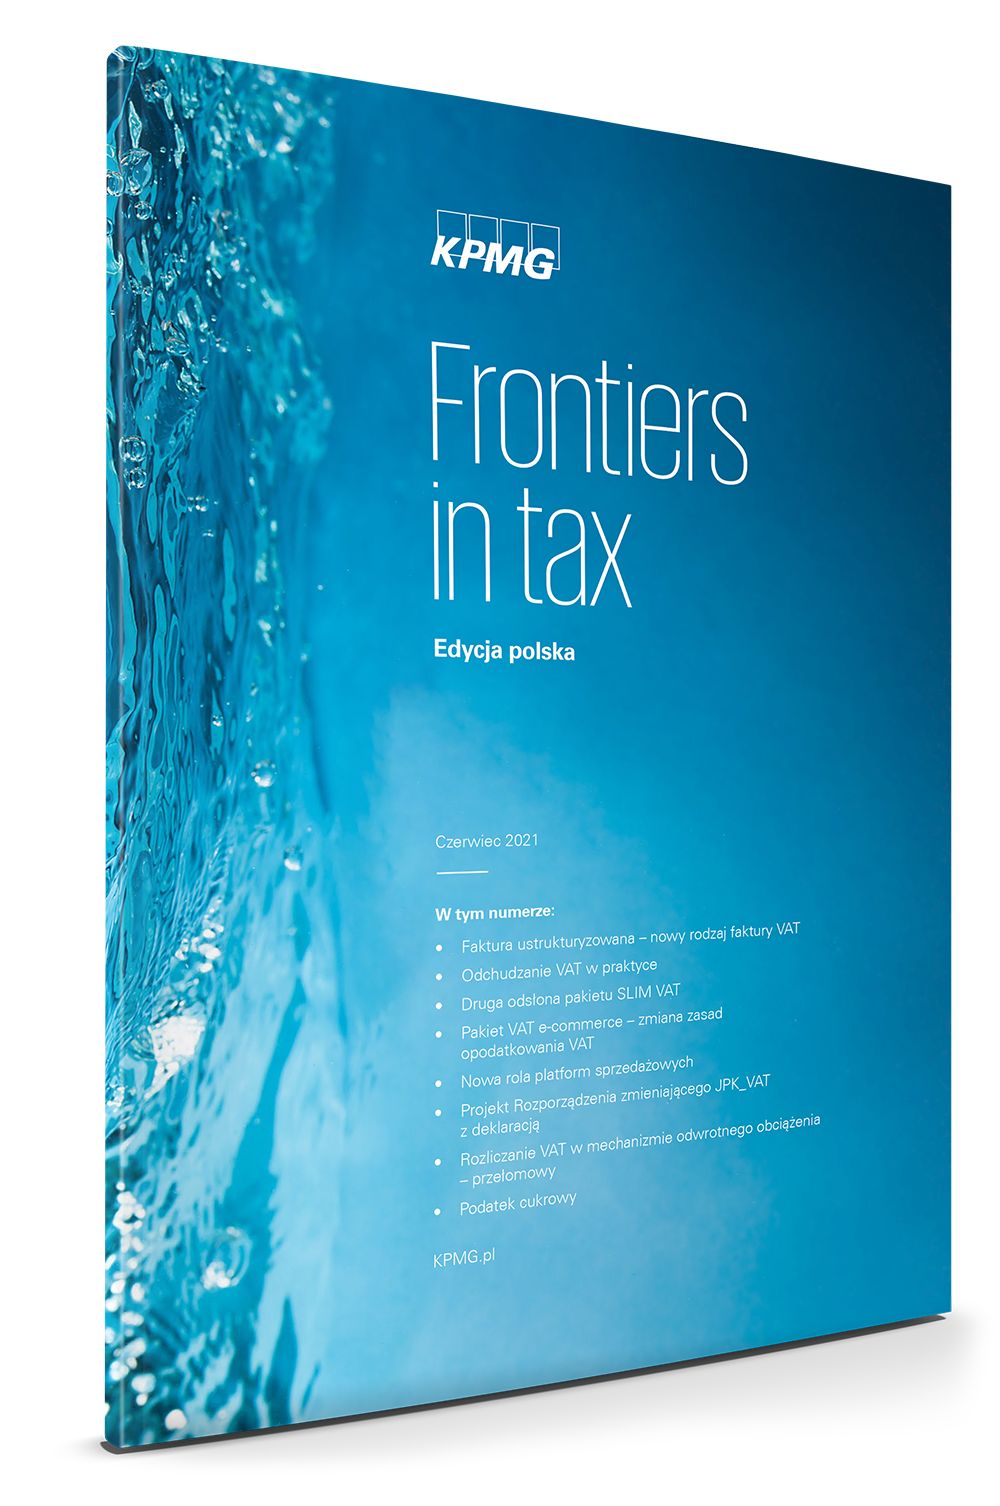 Frontiers in tax